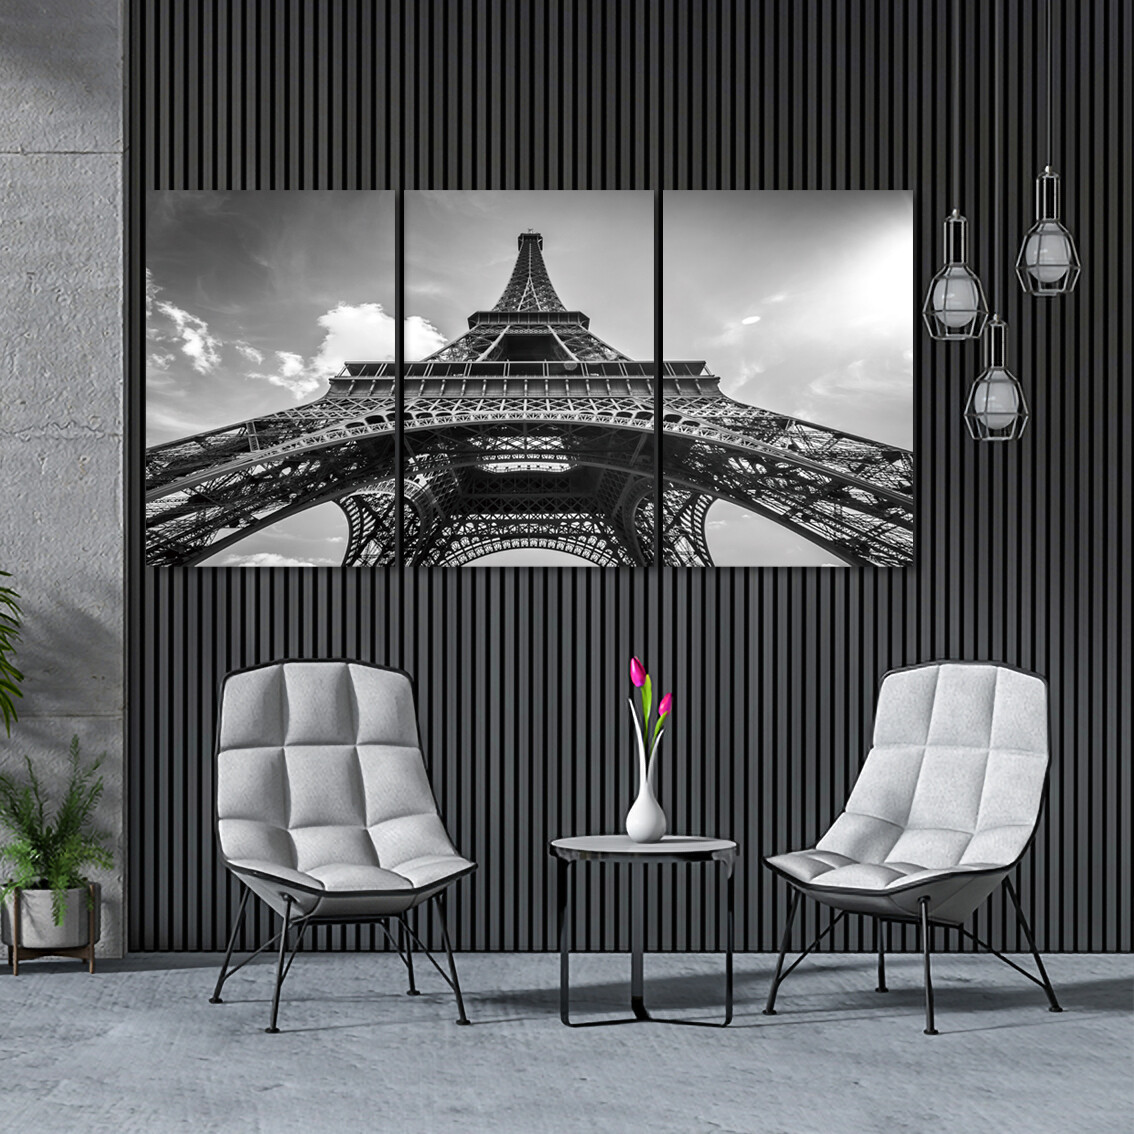 Eiffel Tower Black and White - Modern Luxury Wall art Printed on Acrylic Glass - Frameless and Ready to Hang